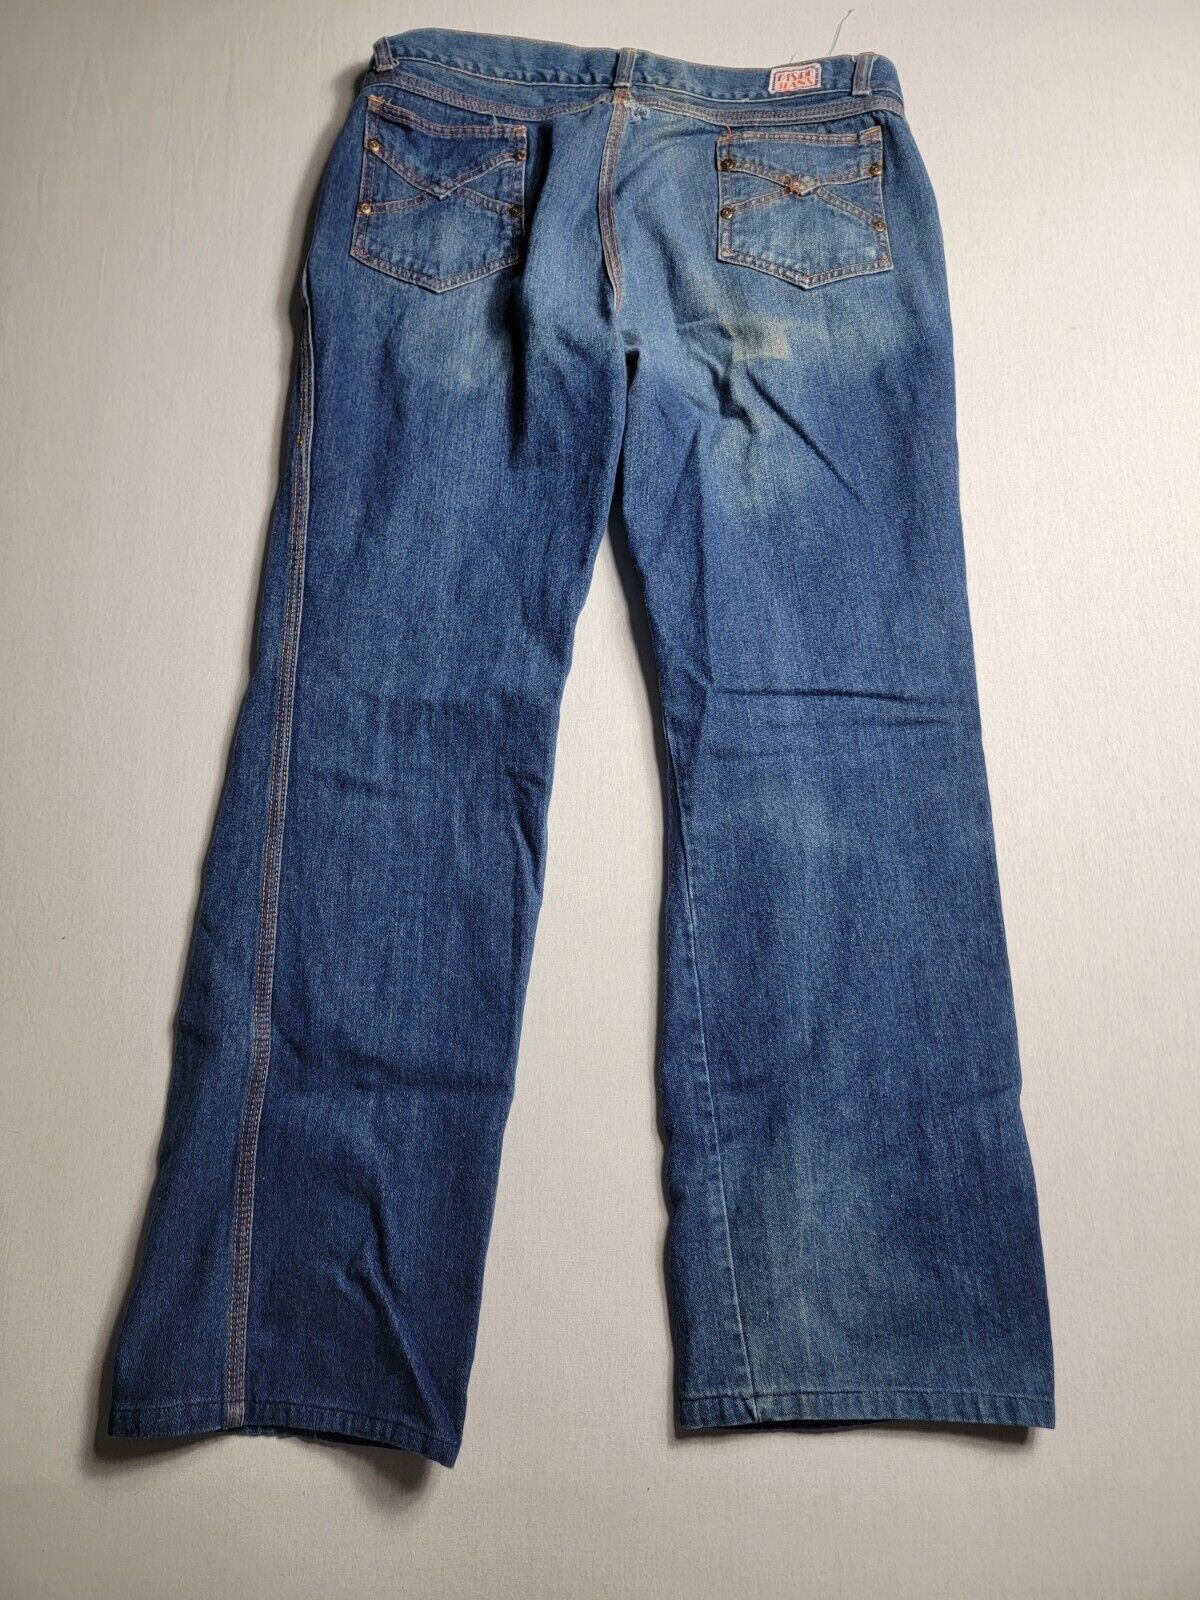 Vintage Disco Jeans Actual 34x29 Rare Made in British Crown Colony